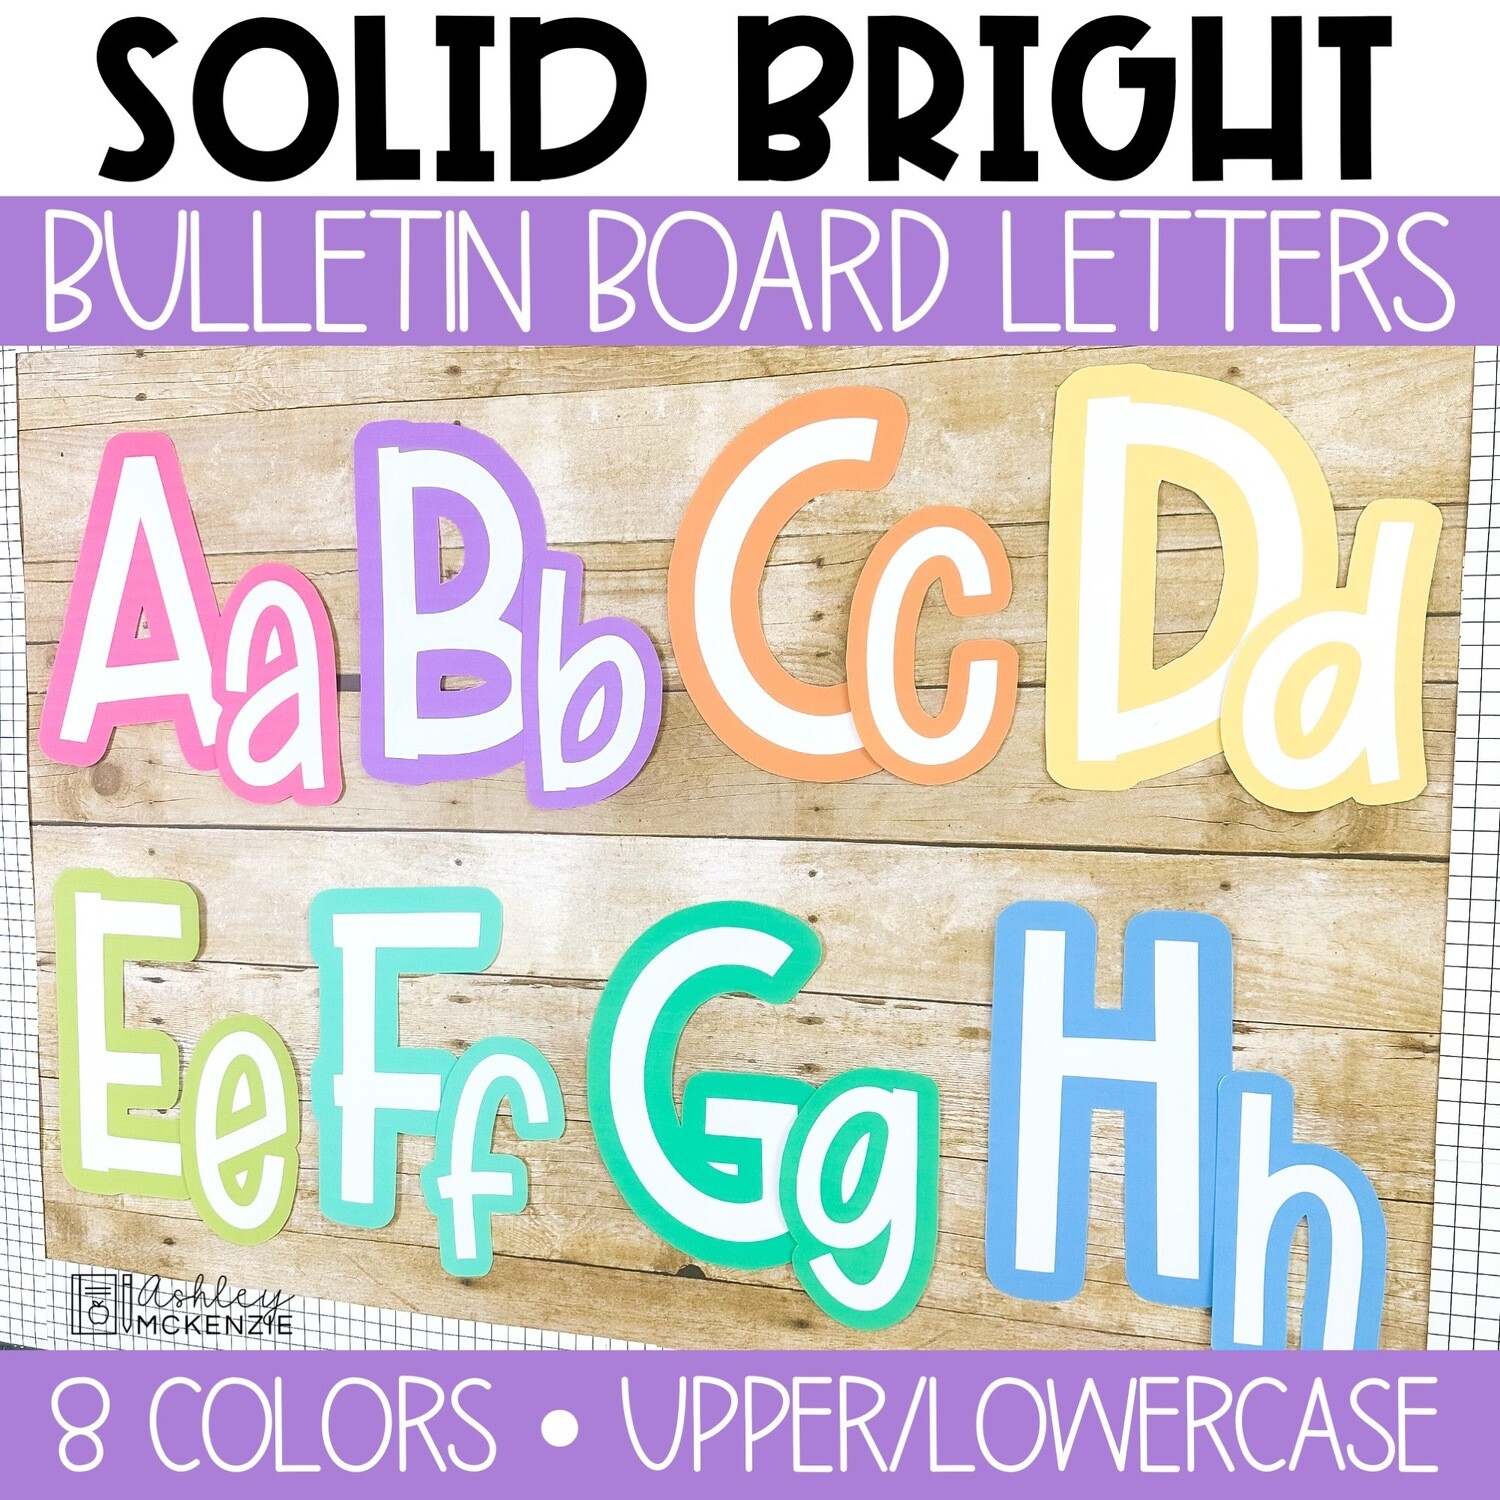 Free Alphabet Letter Templates to Print and Cut Out - Make Breaks